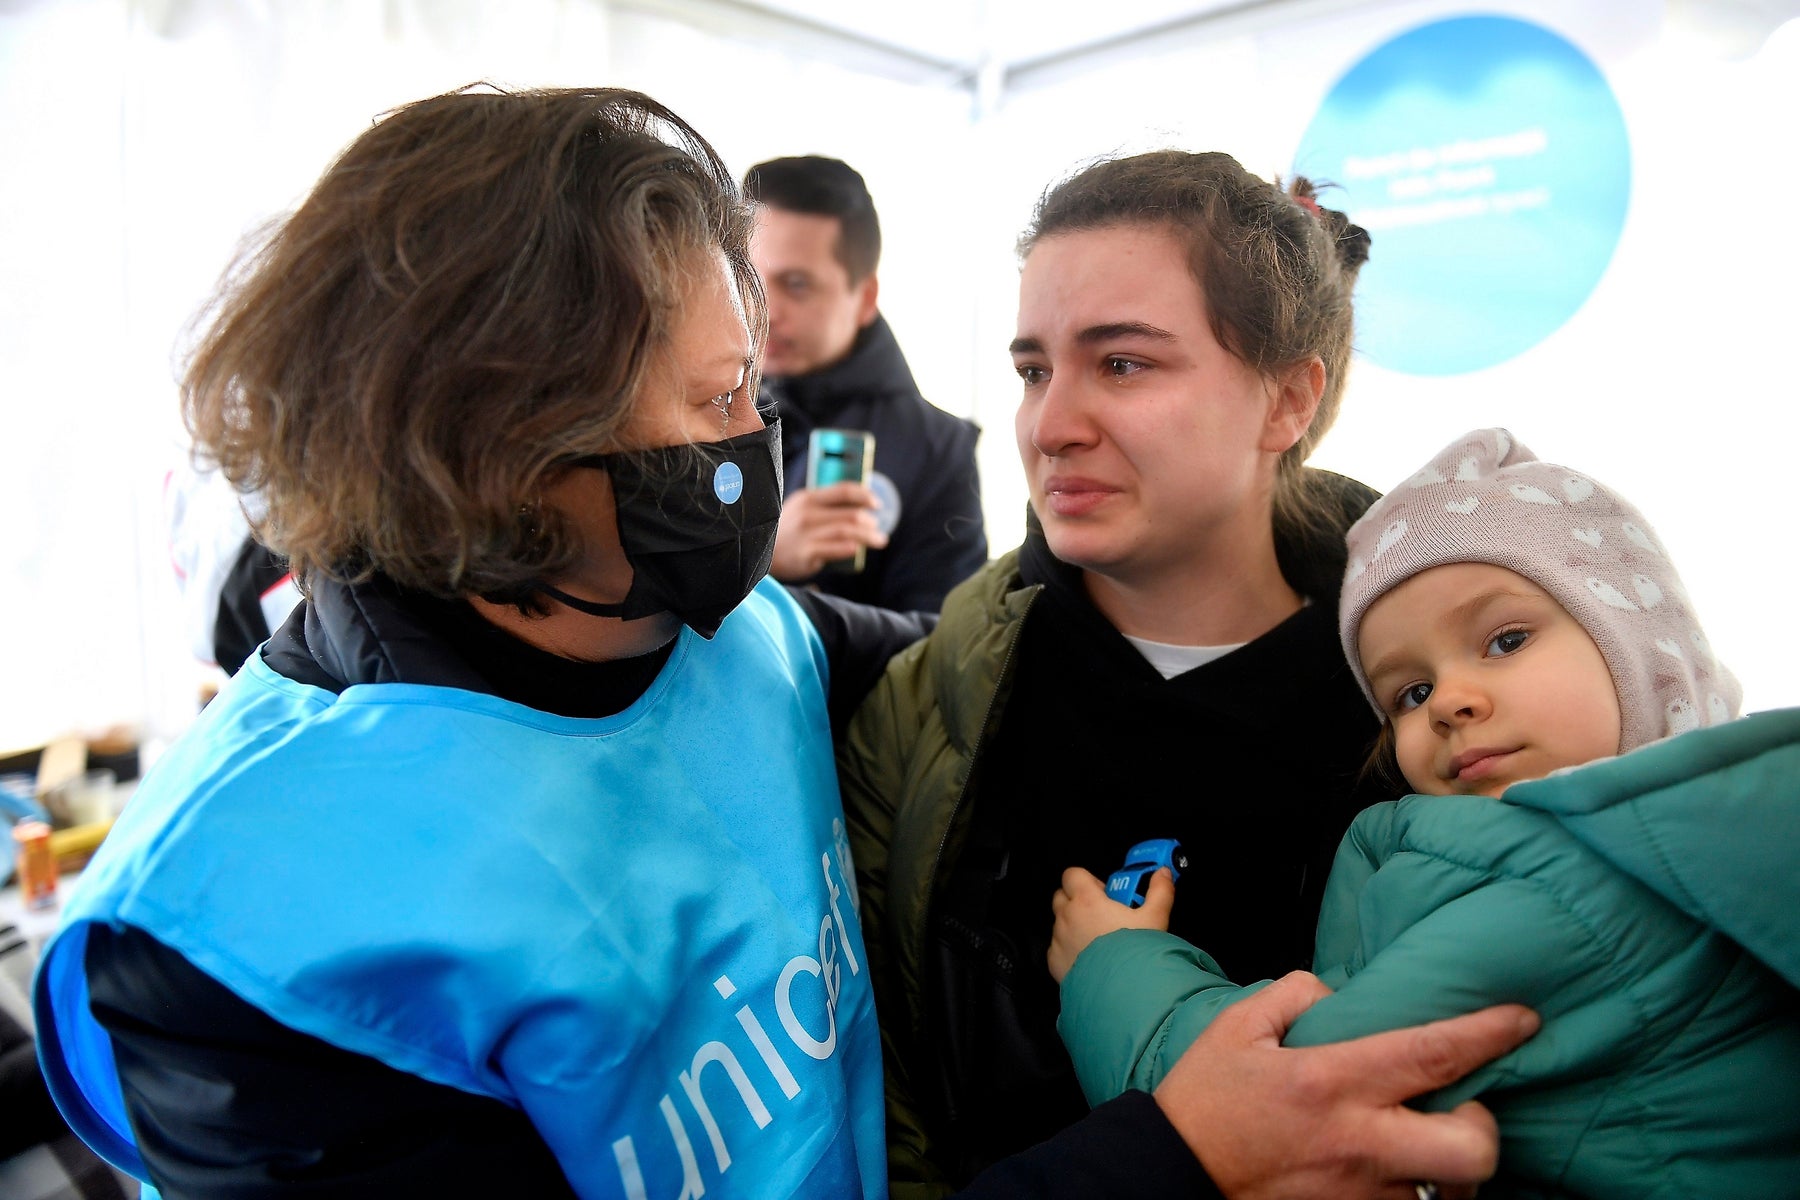 Karina and her daughter Luna, 3 years old are talking with the UNICEF worker.